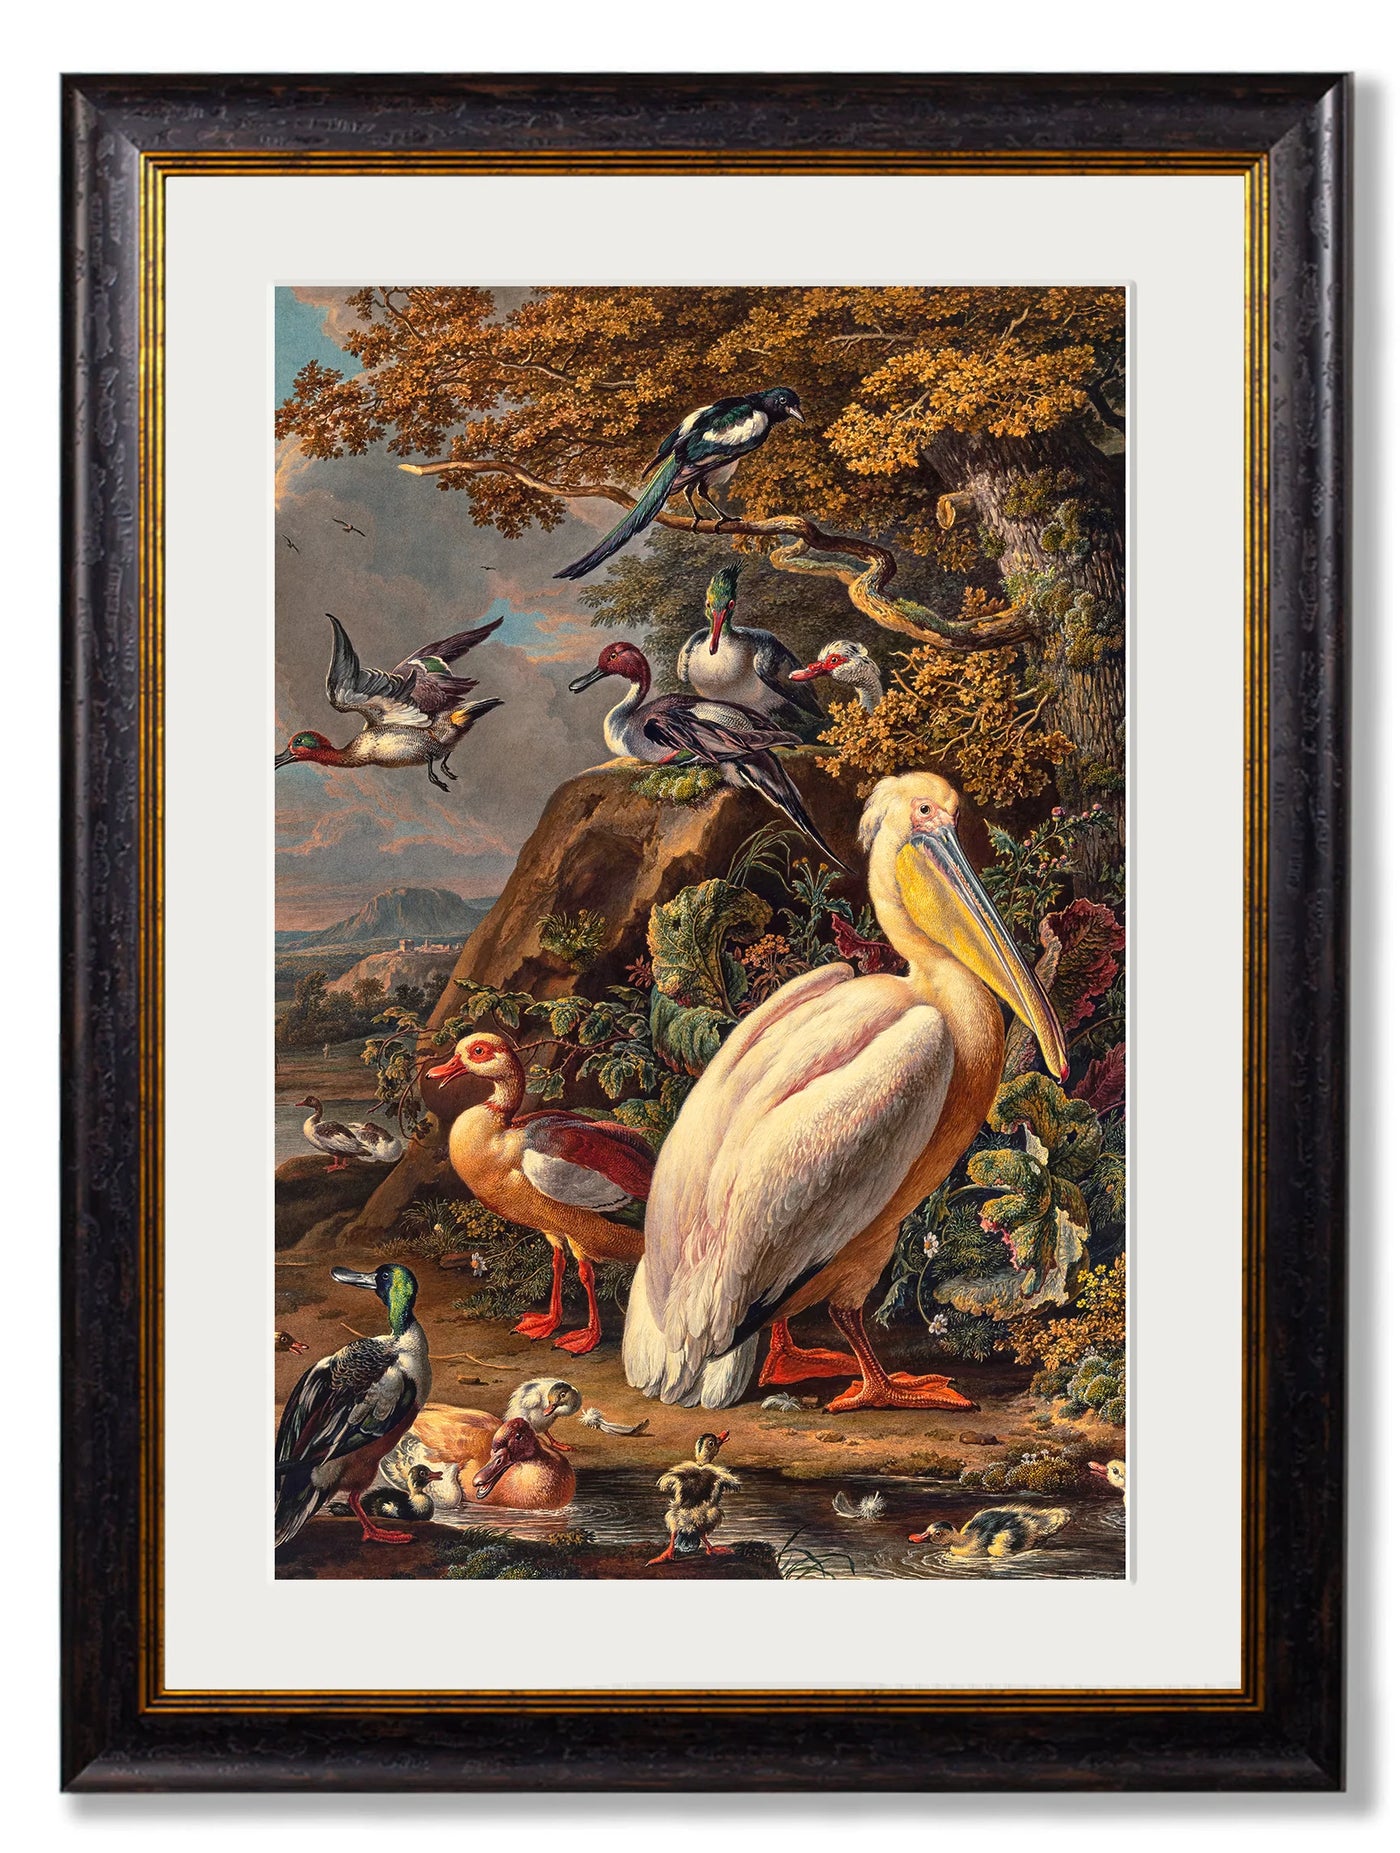 c.1683 Pelican Painting - TheArtistsQuarter